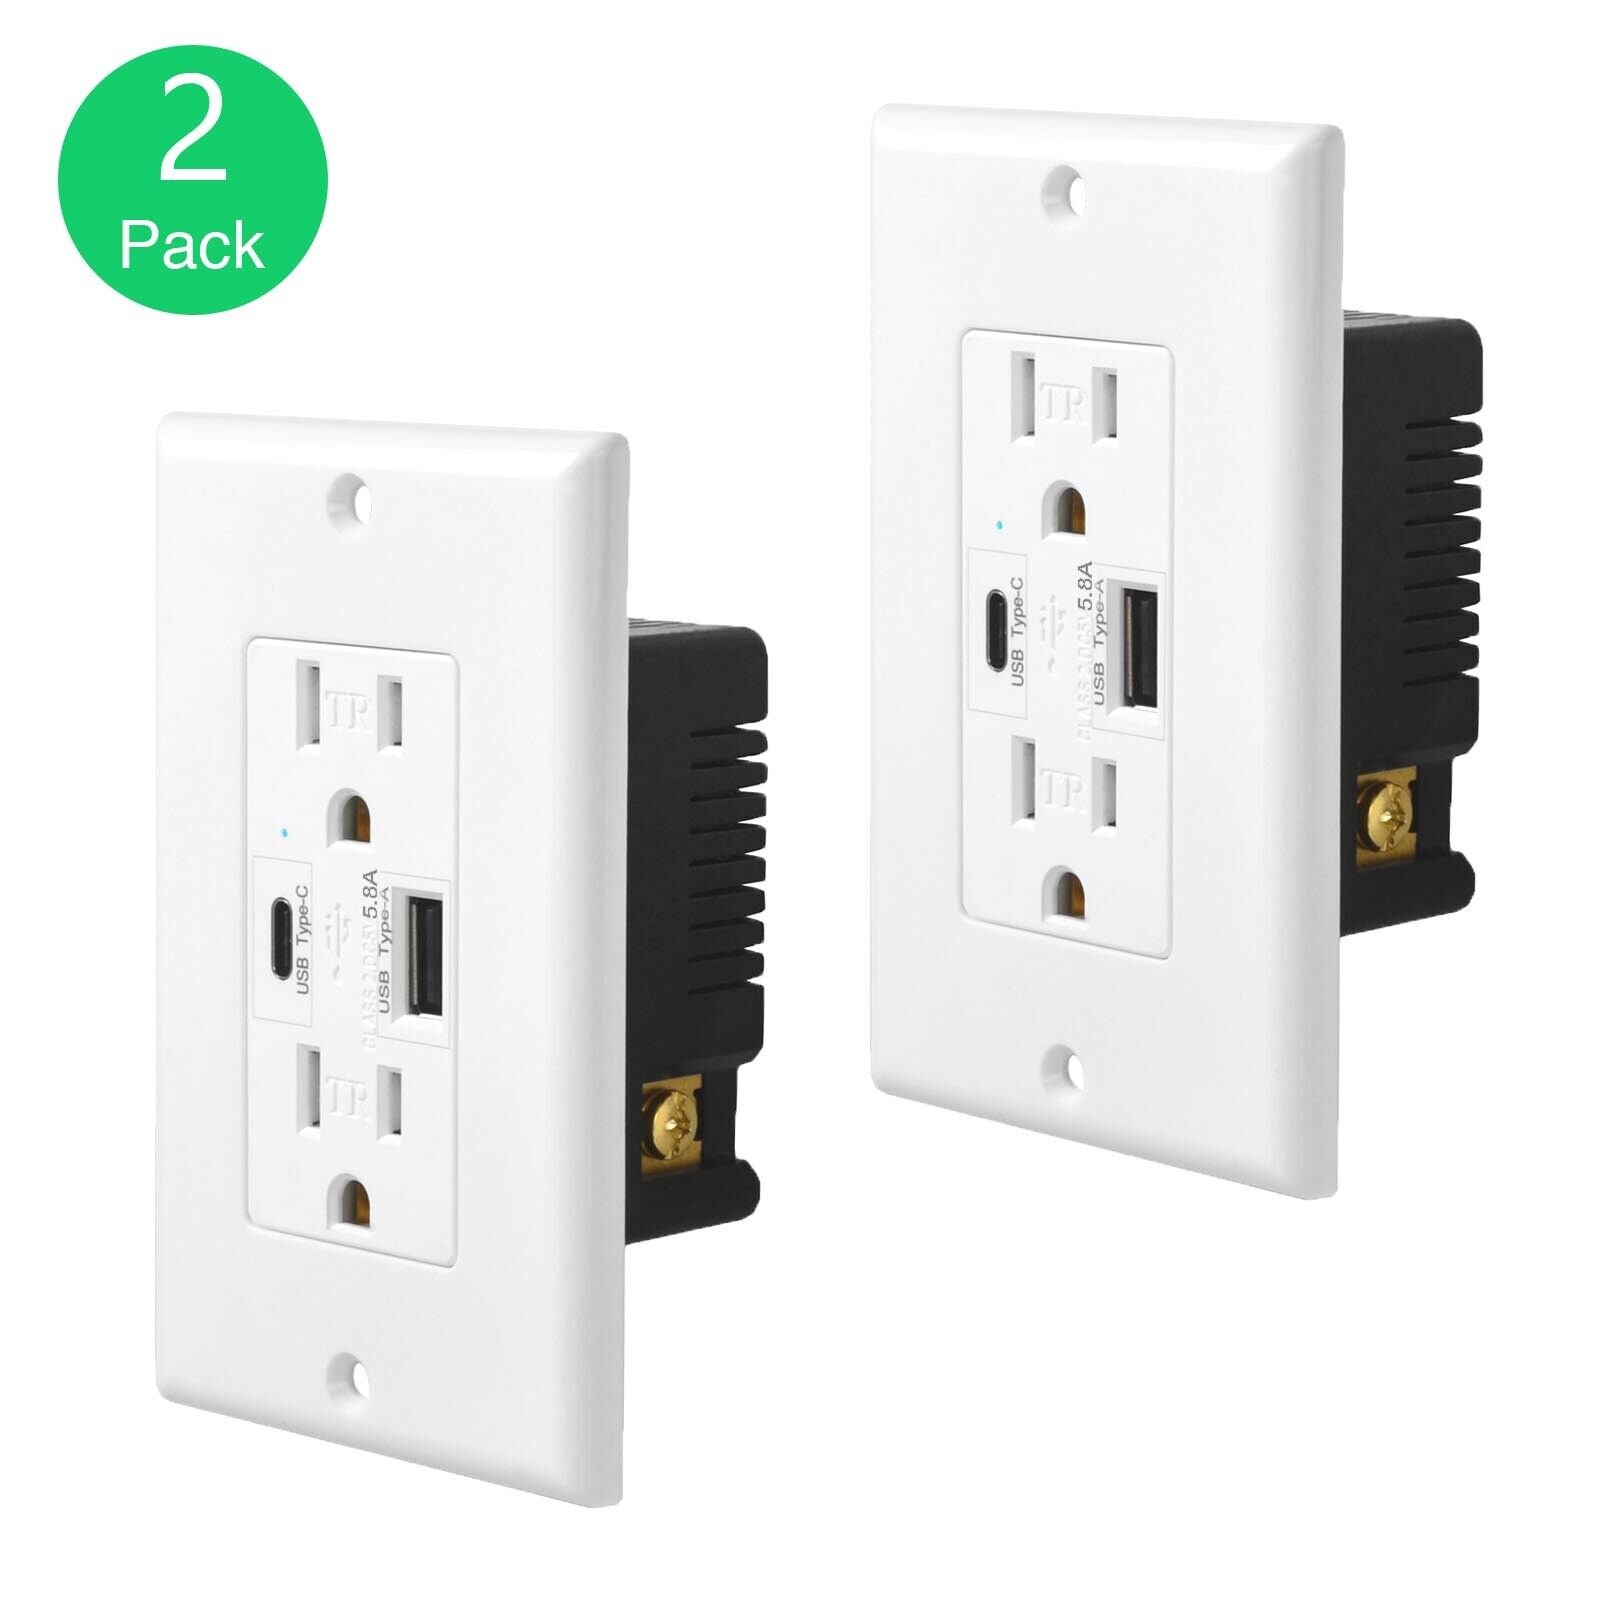 2PK 5.8A USB Wall Socket Outlet AC Power Receptacle Type-C Fast Charger Plug 15A